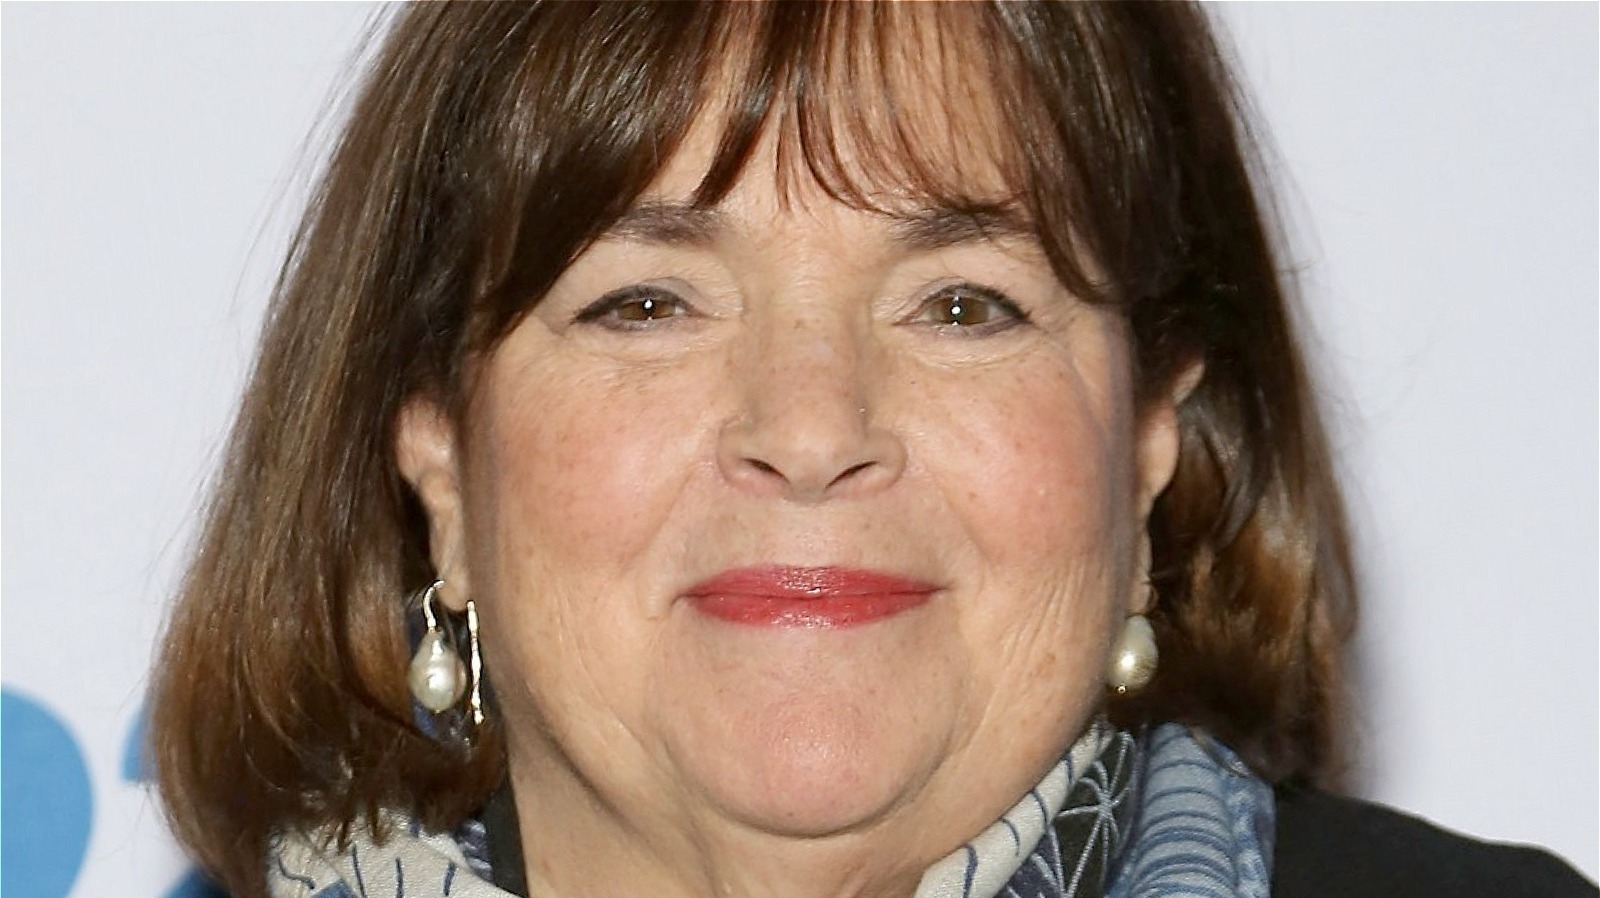 The Incredibly Simple Way Ina Garten Makes Hot Dogs